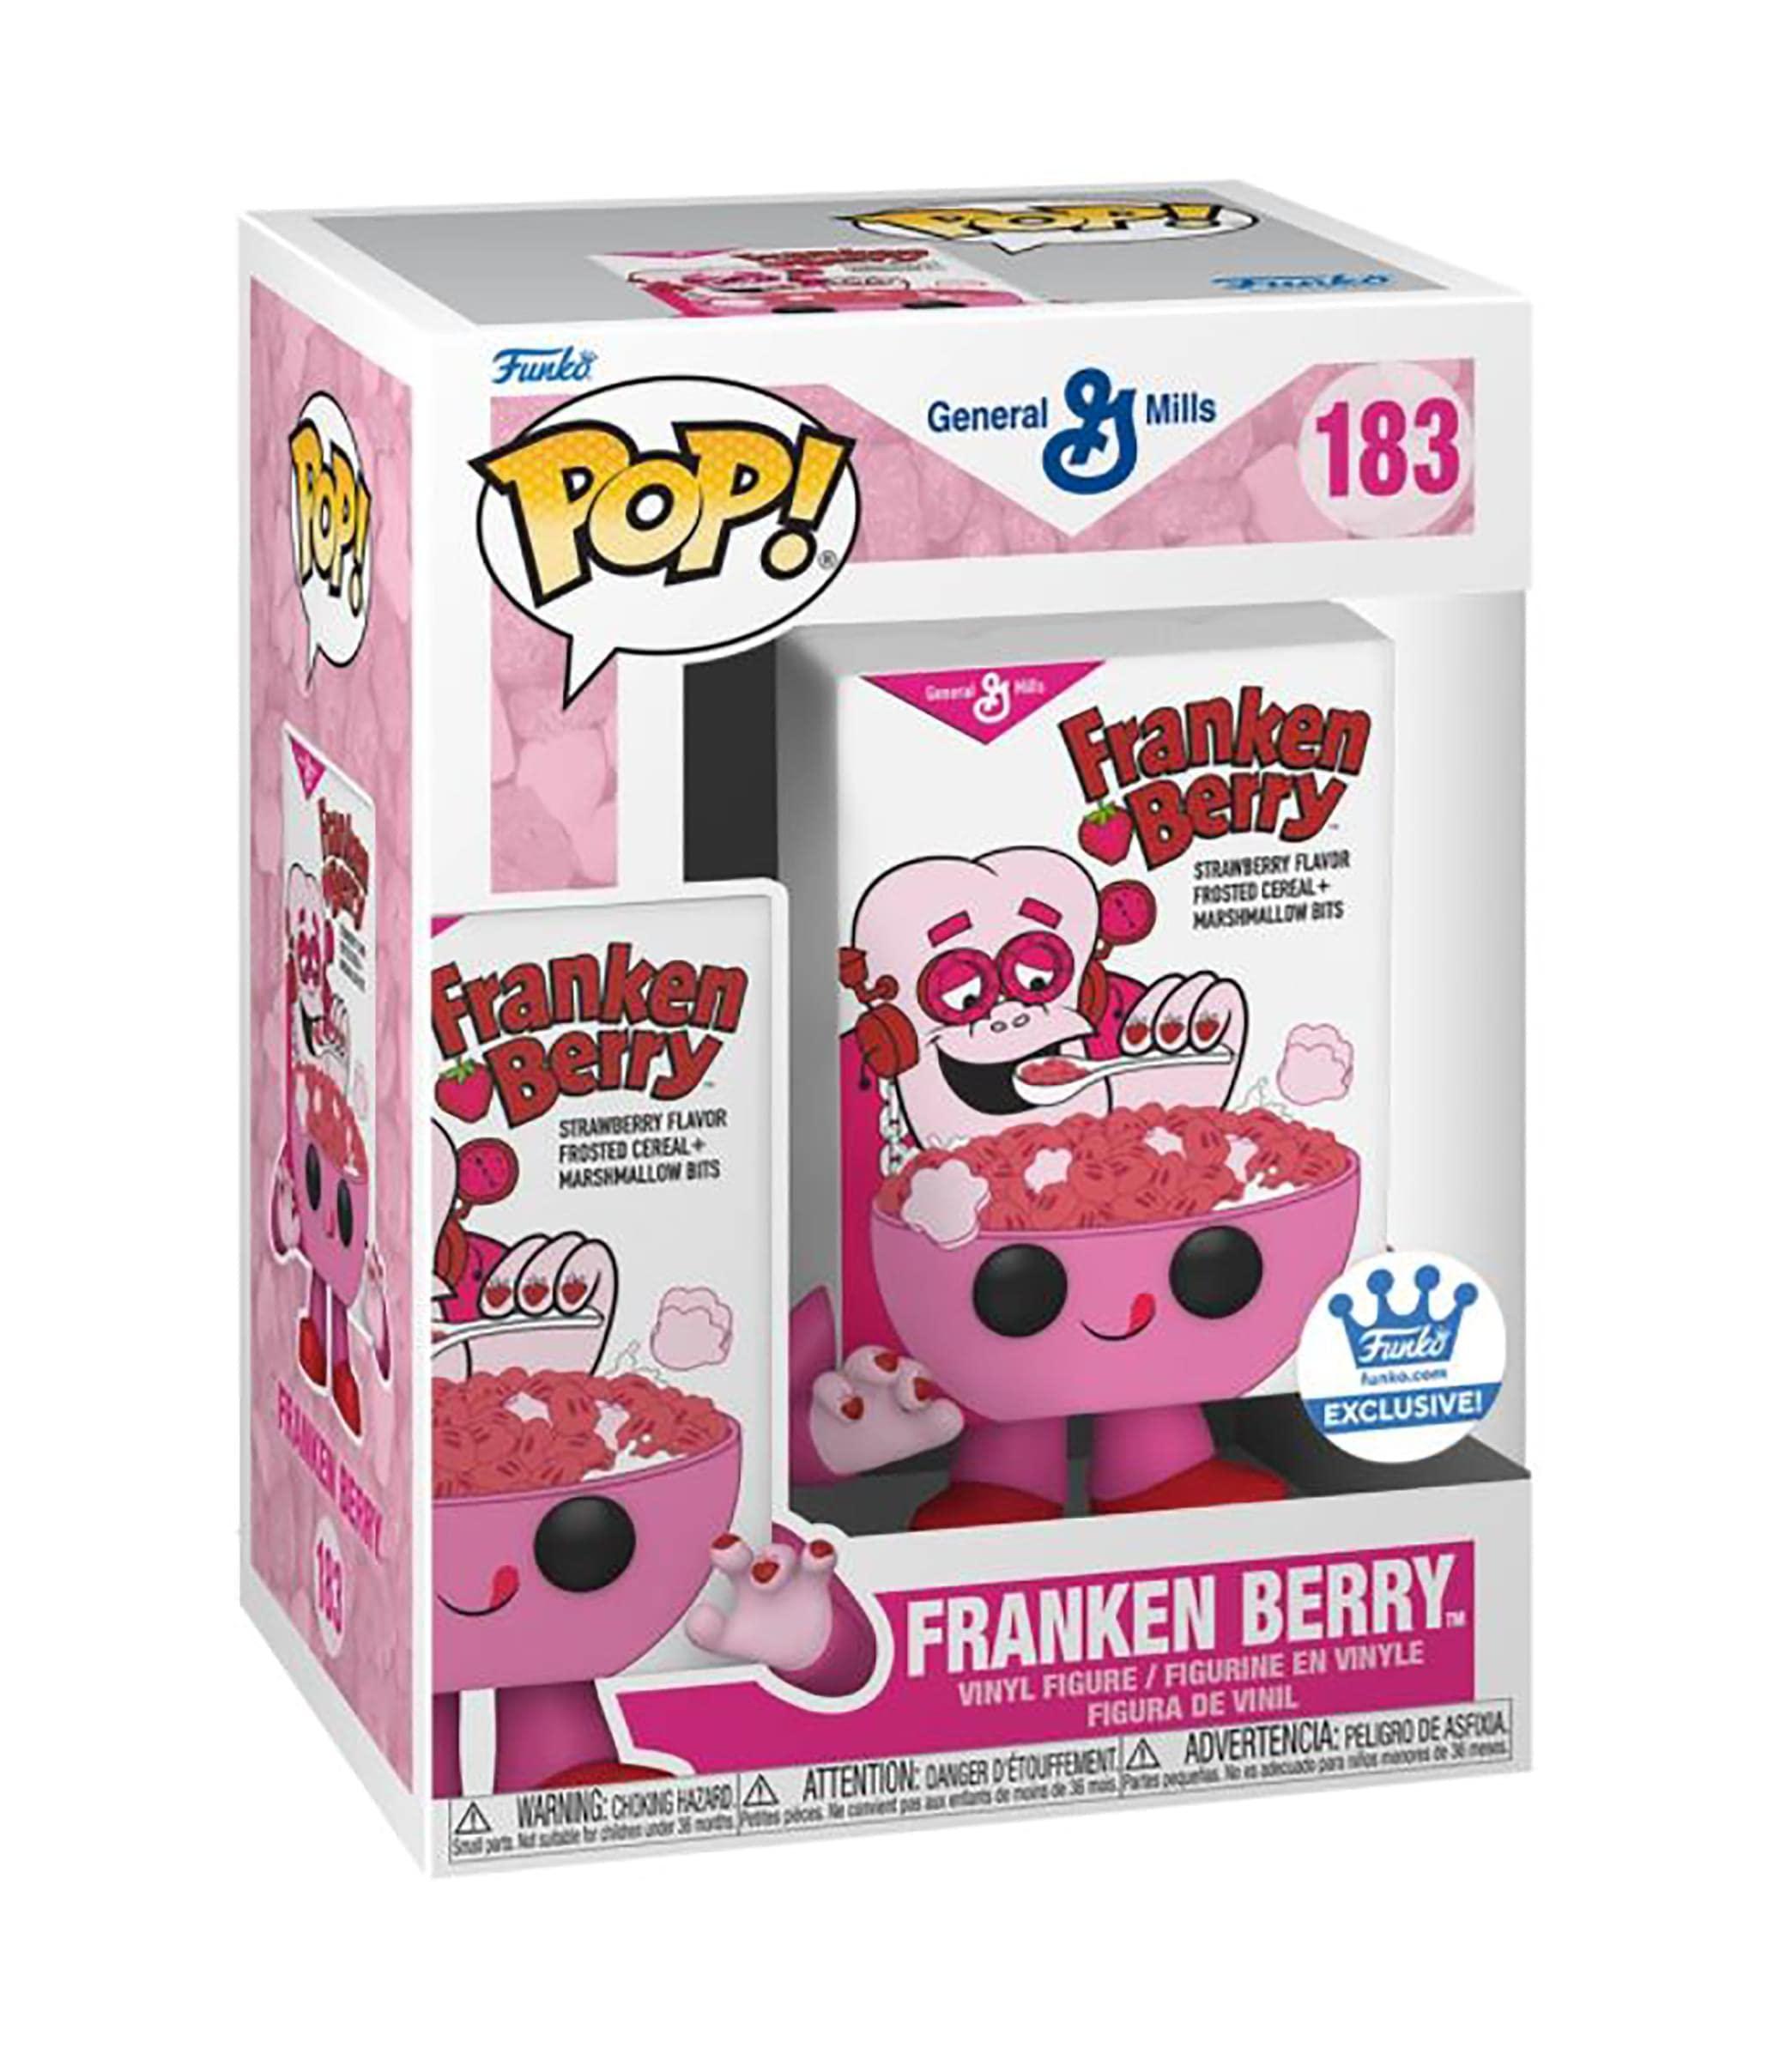 Pop! Ad Icons - General Mills - Franken Berry - #183 - Funko Store EXCLUSIVE - Hobby Champion Inc